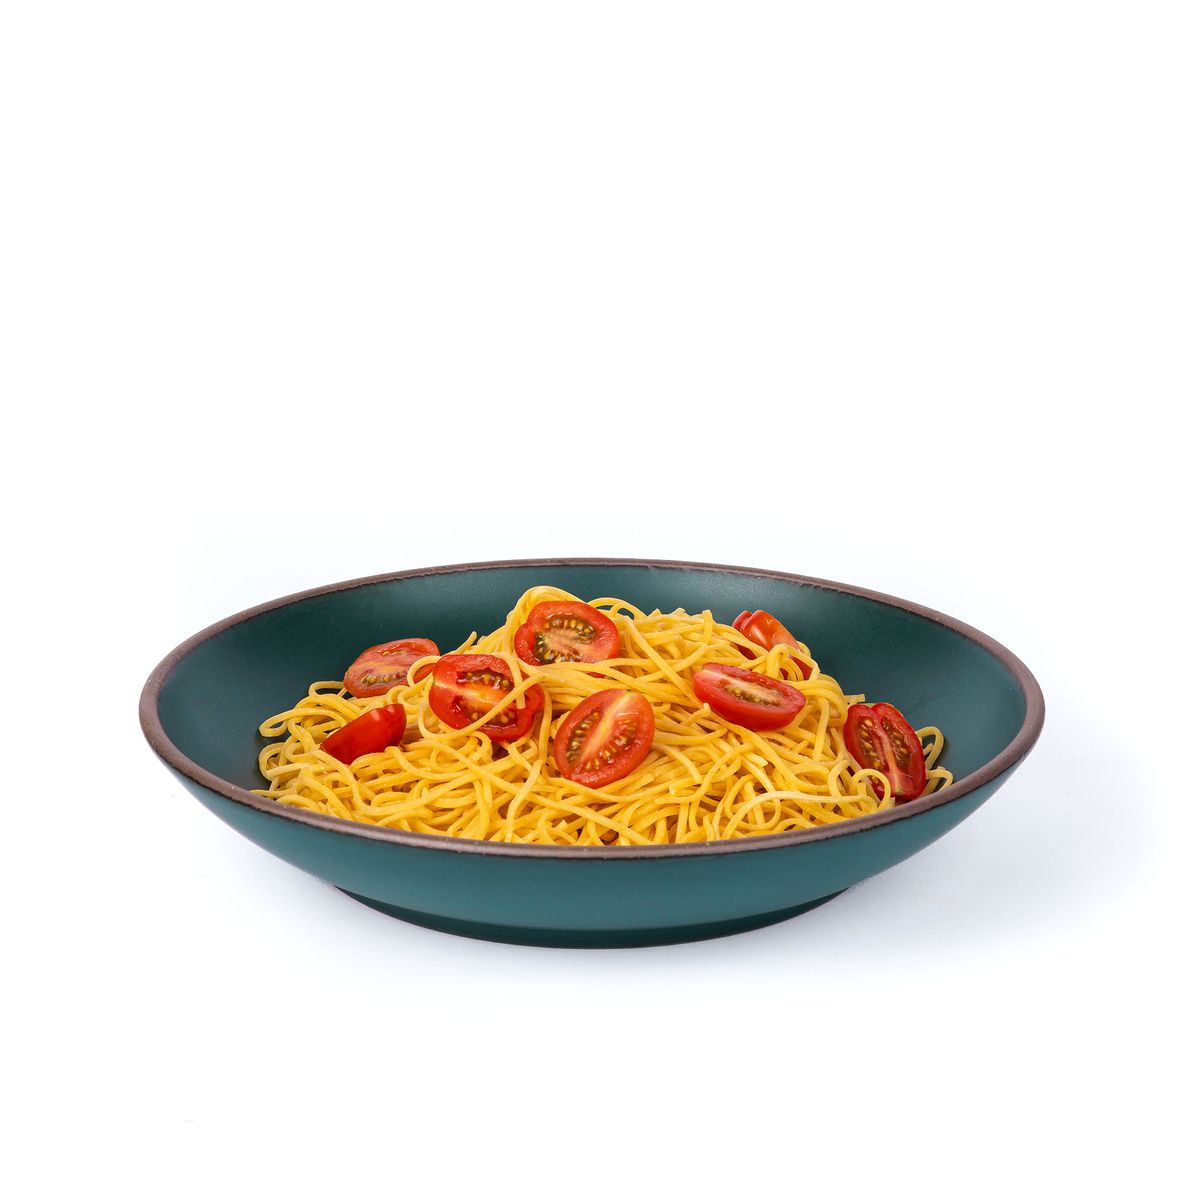 Spaghetti and sliced tomatoes on a large ceramic plate with a curved bowl edge in a deep, dark teal color featuring iron speckles and an unglazed rim.